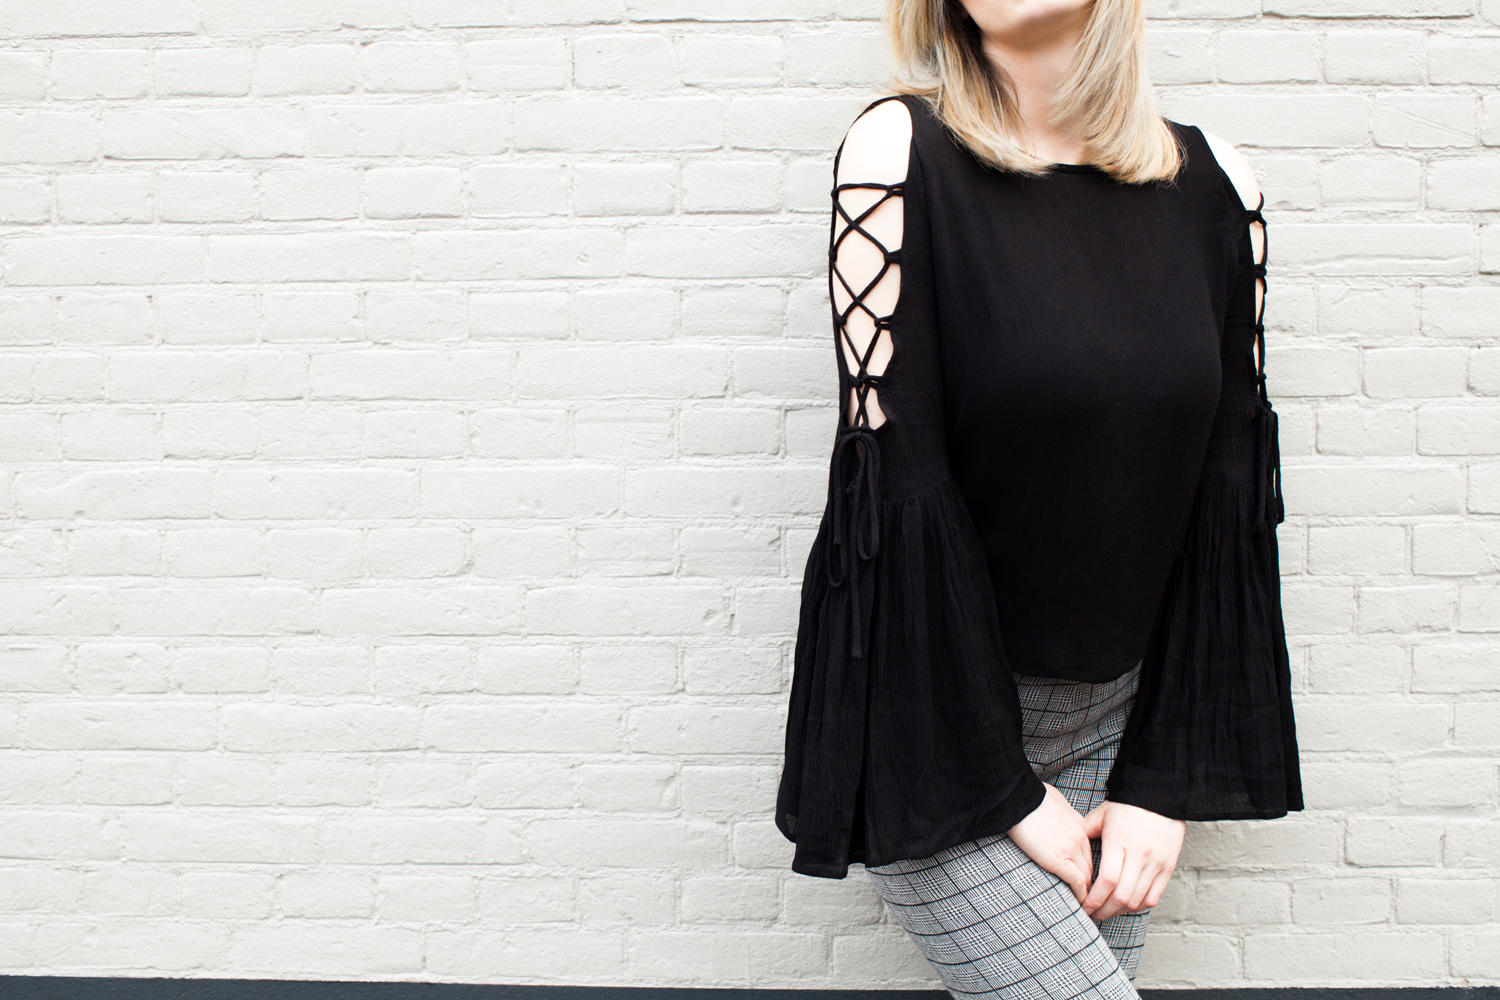 Black lace up open shoulder top with bell sleeves